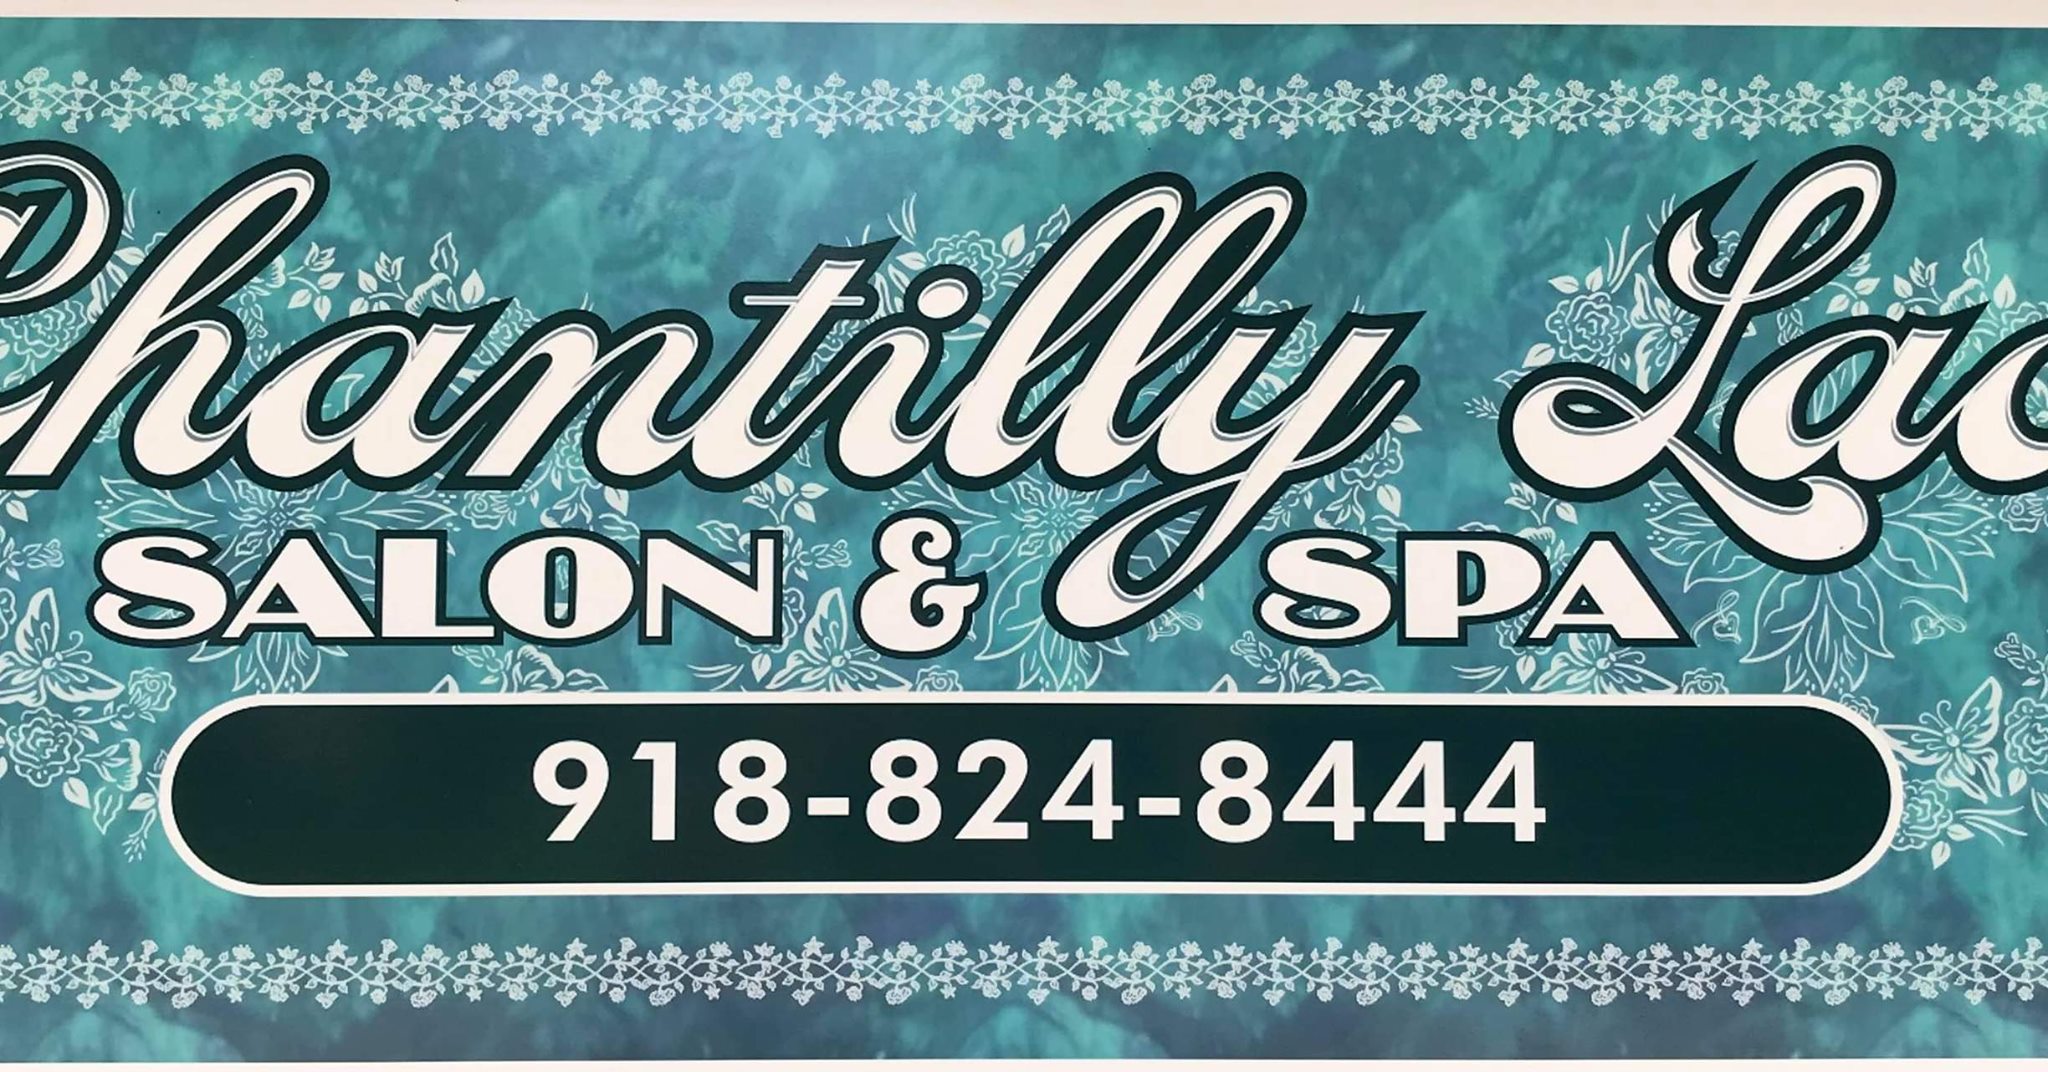 Chantilly Lace Salon and Spa